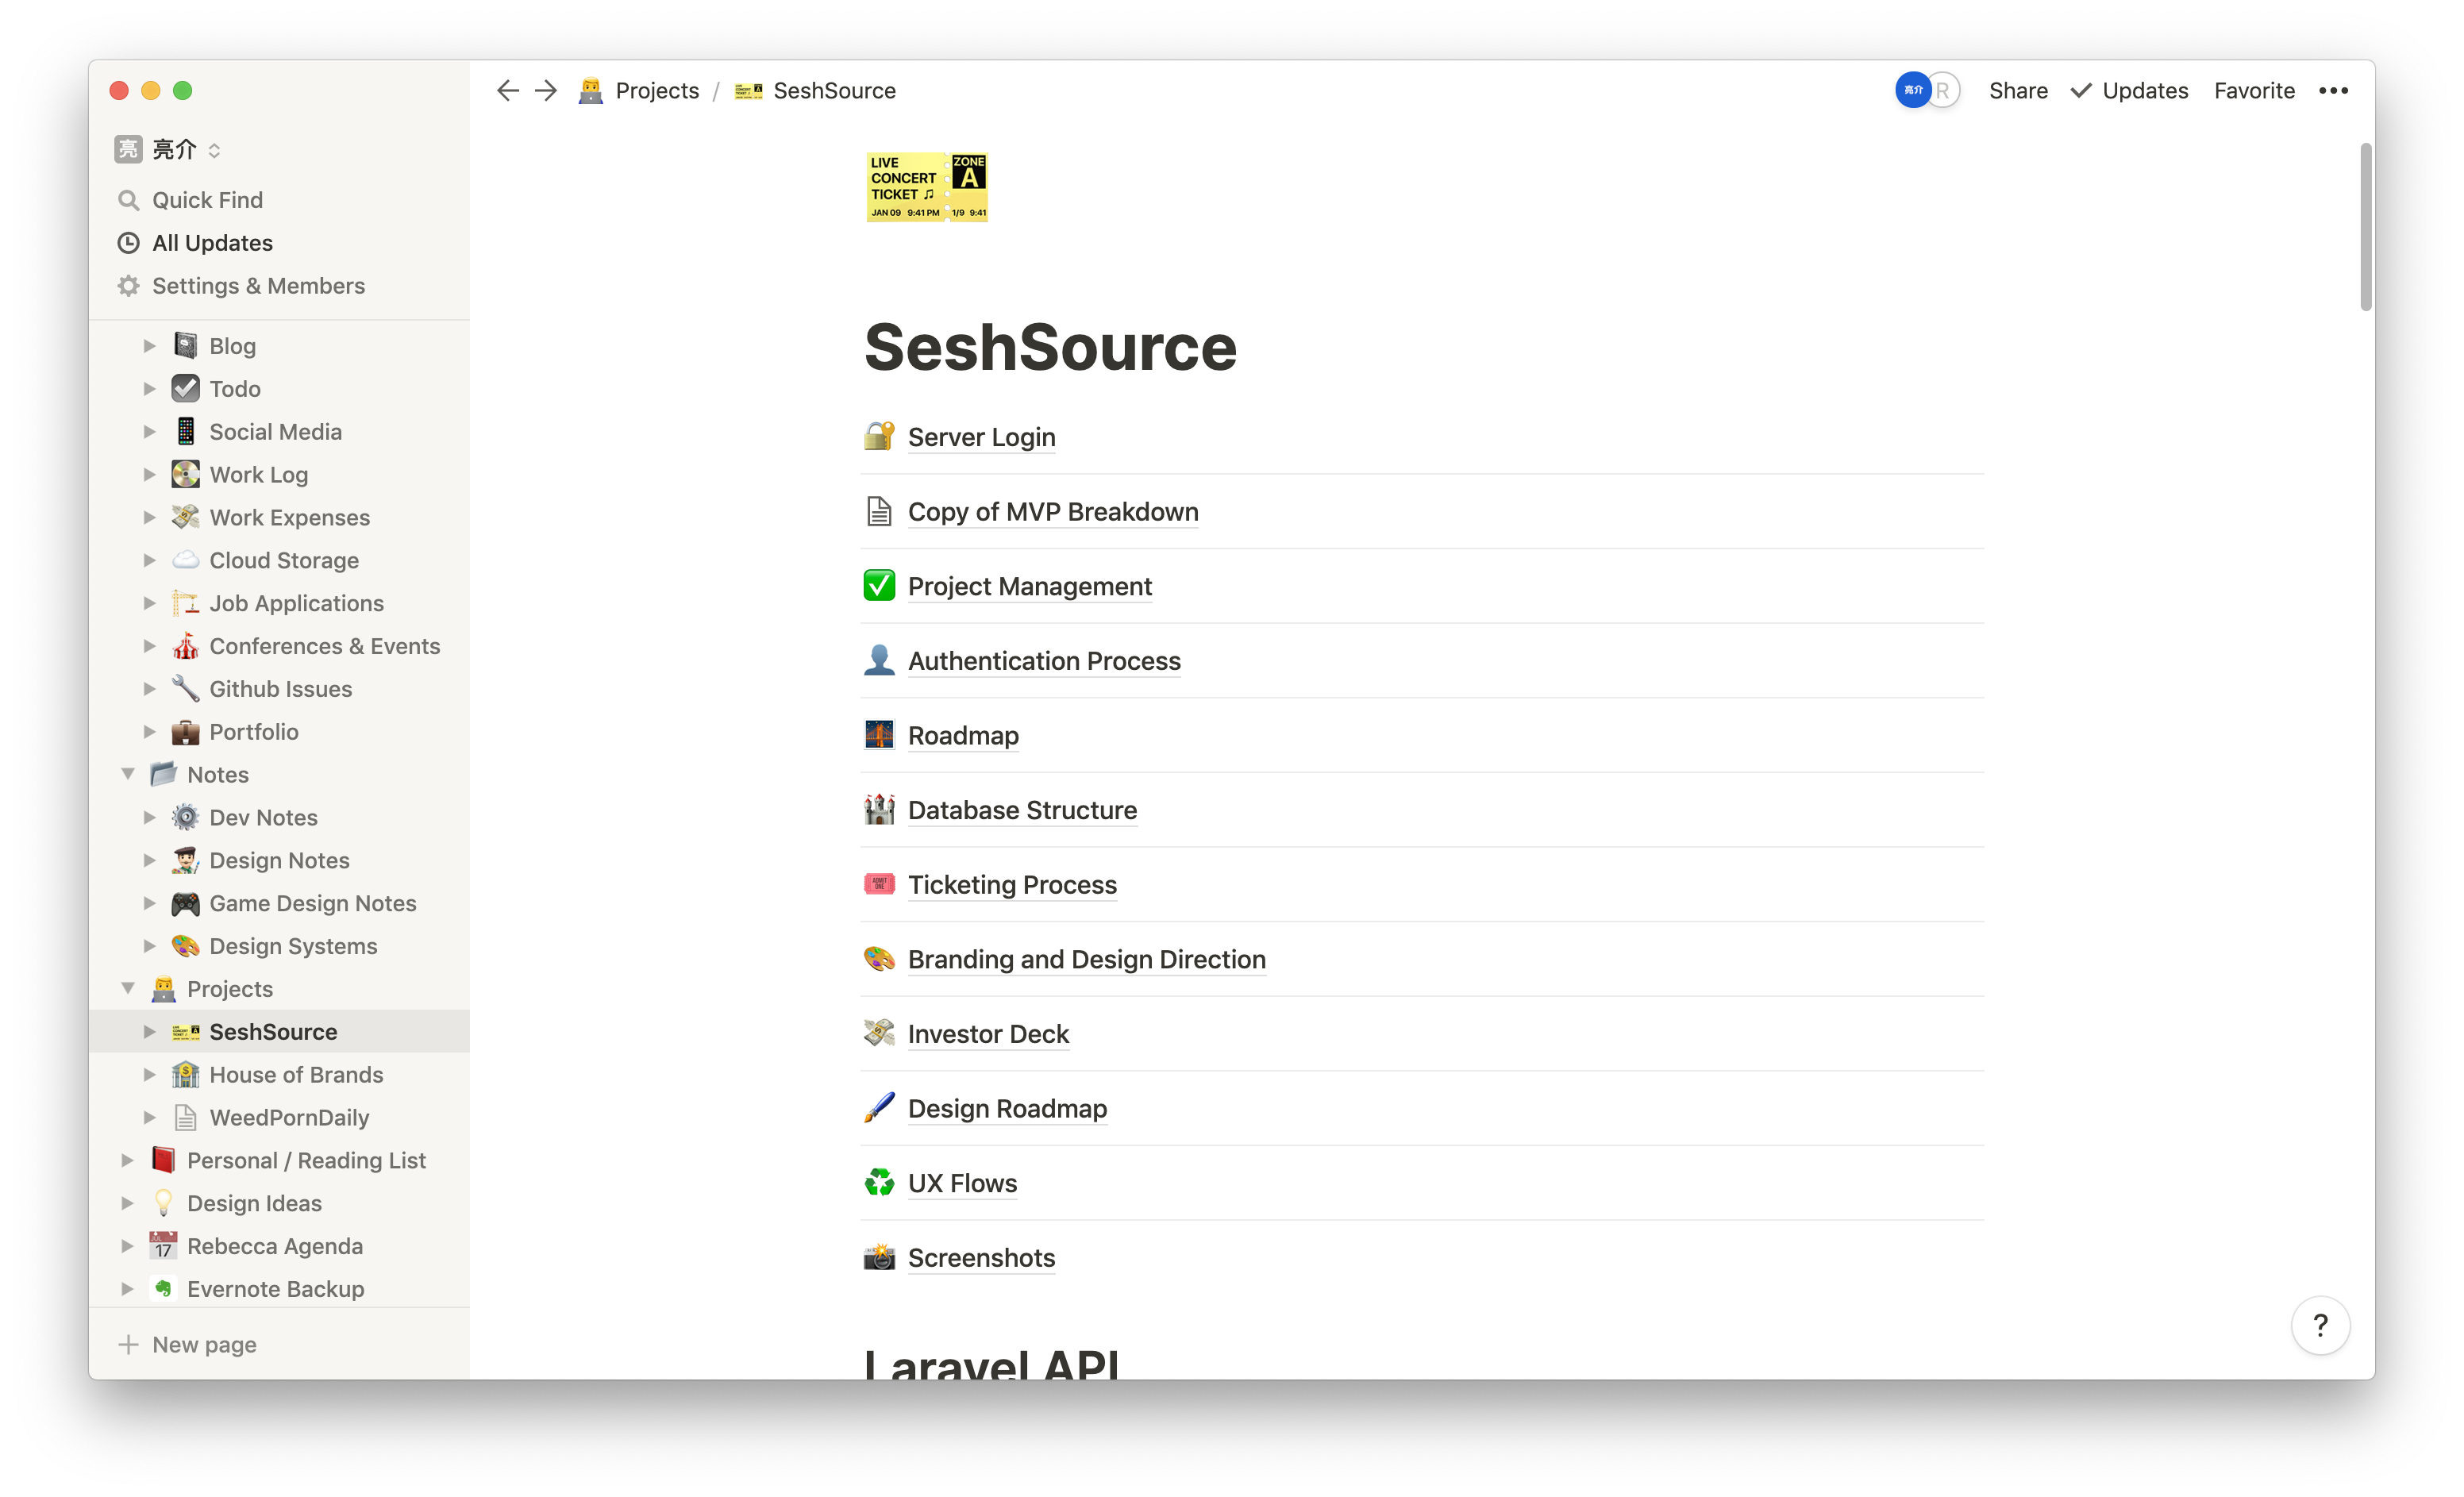 Screenshot of the Notion app on a project page (SeshSource) containing a list of other Notion pages like Roadmap and Server Login